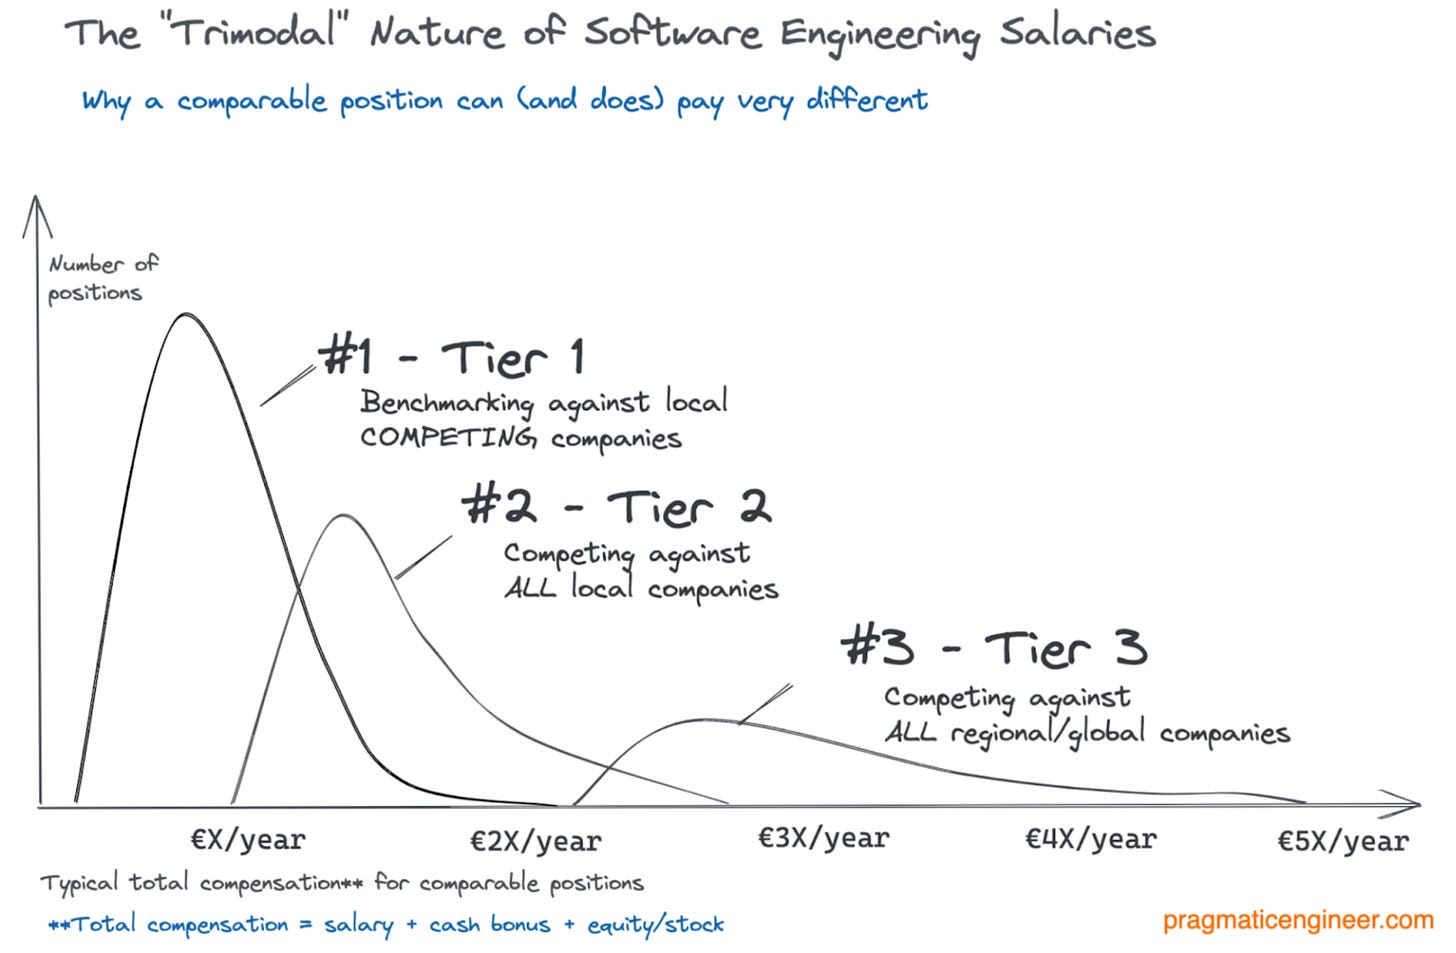 The “trimodal” nature of software engineering compensation. Source: The Pragmatic Engineer blog.